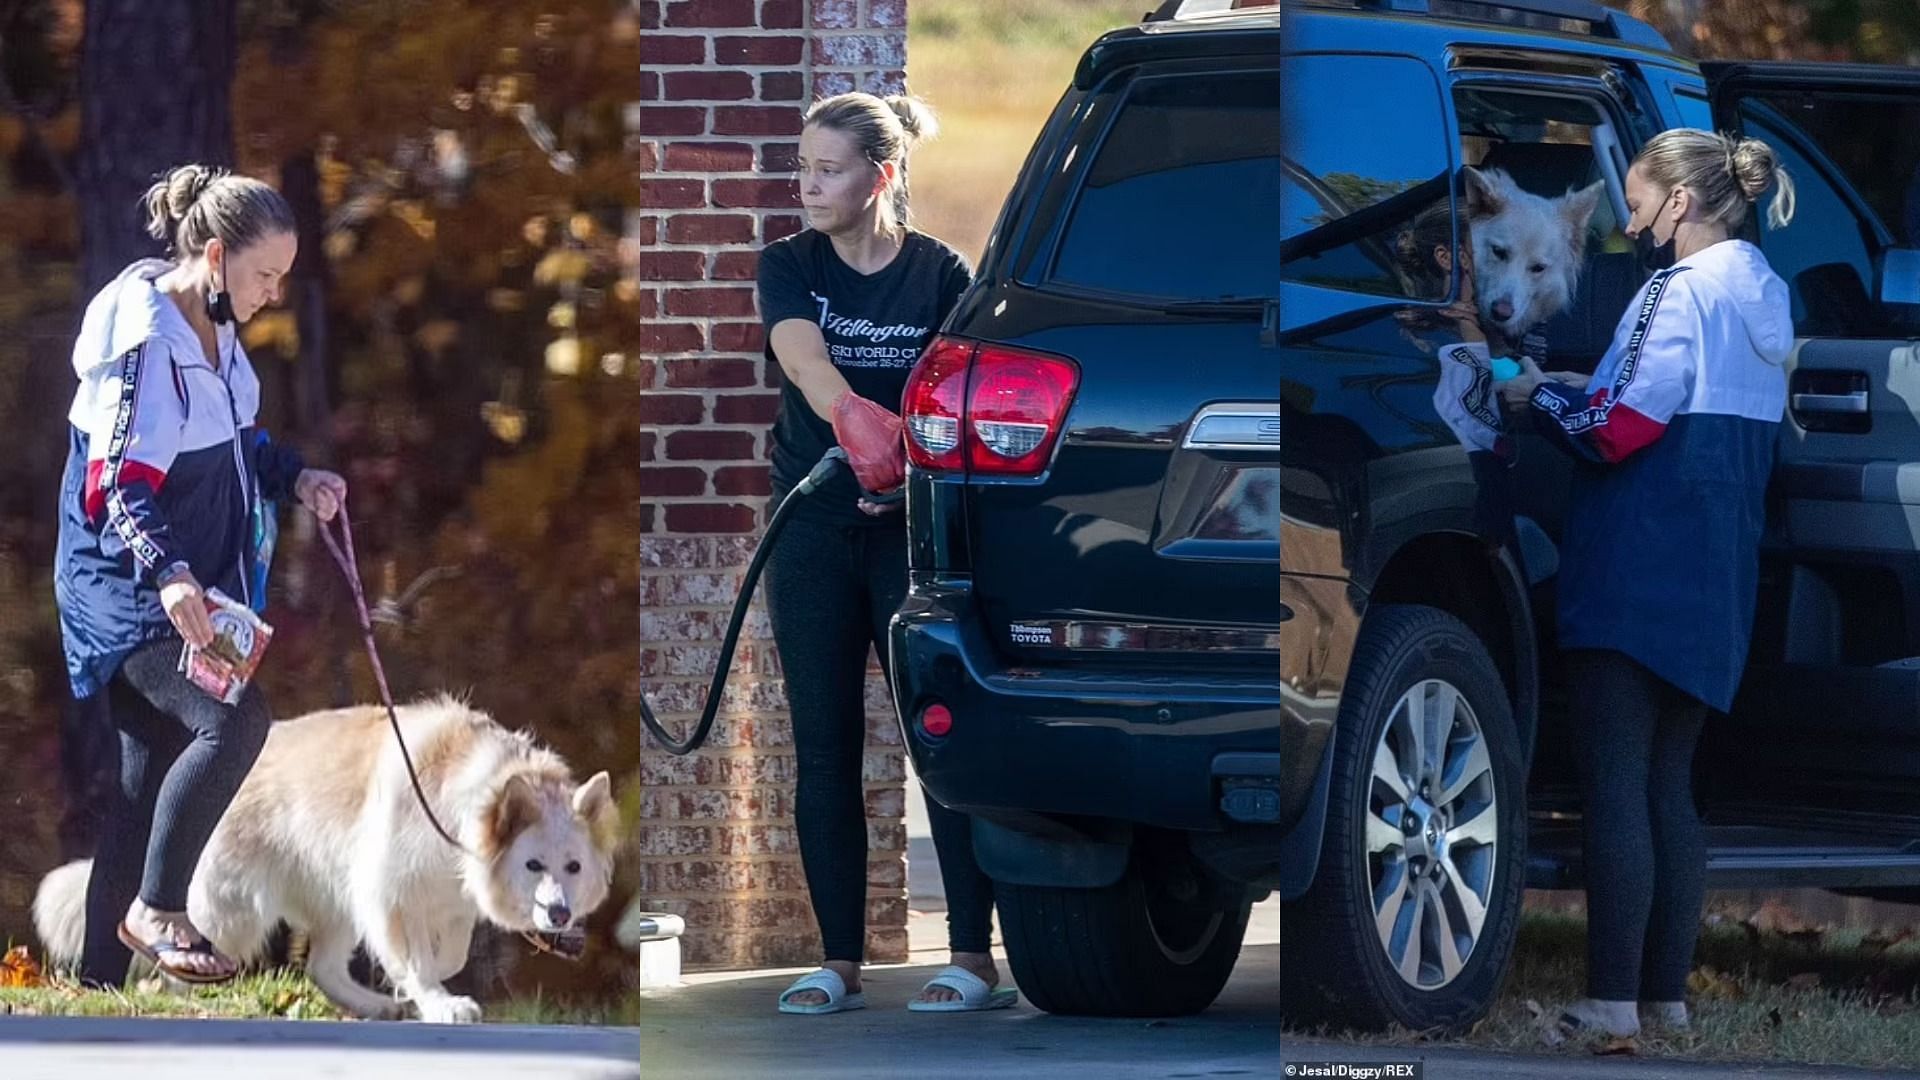 Kate was recently spotted in North Carolina (Images via Jesal/Diggzy/REX)